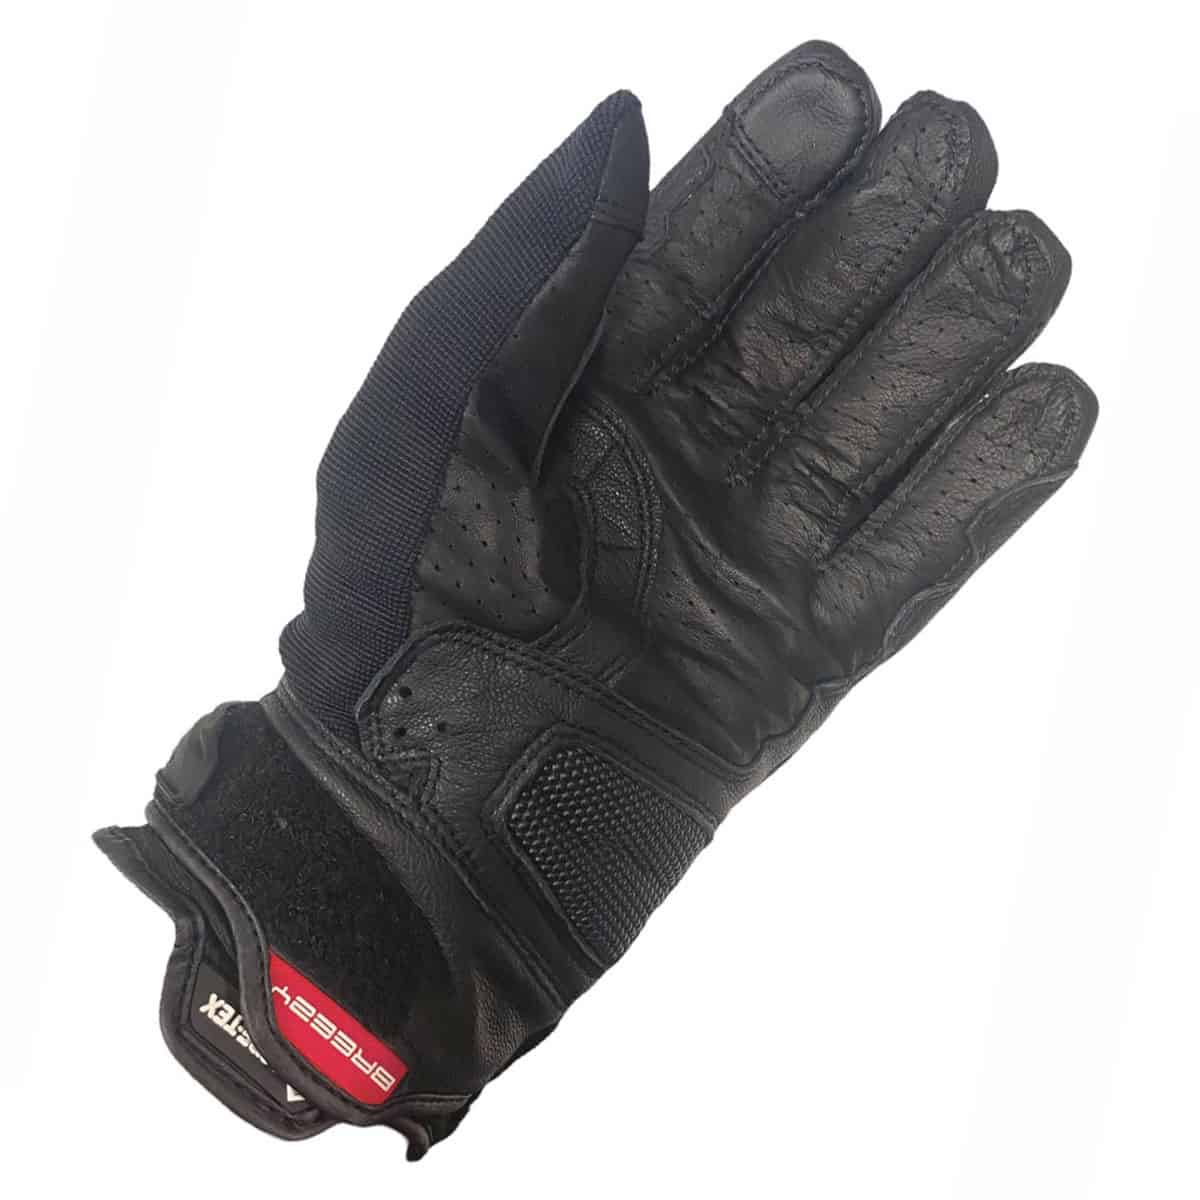 Held Sambia 2-in-1 Gore-Tex touring gloves: Motorcycle gloves with 2 compartments so you can adapt grip & comfort to any touring climate - Palm view